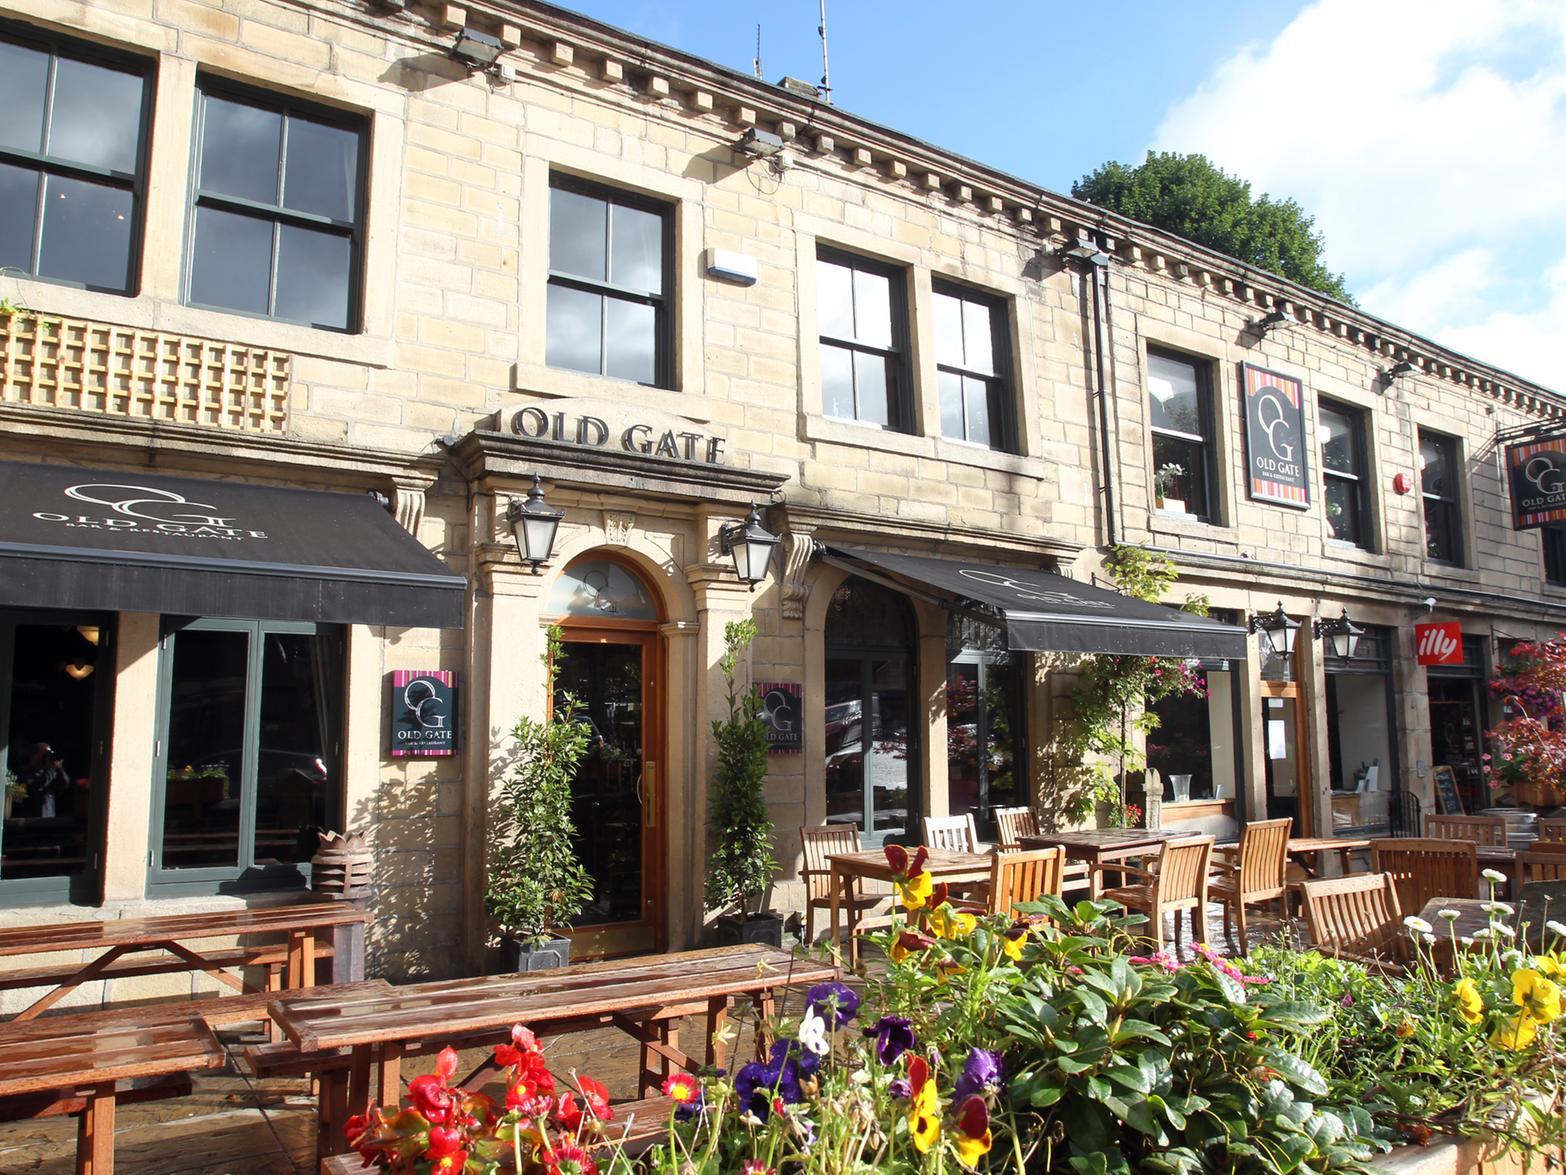 This homey pub in the centre of Hebden Bridge receives high praise for its food offerings as well as its warm and welcoming atmosphere. Its also dog friendly.